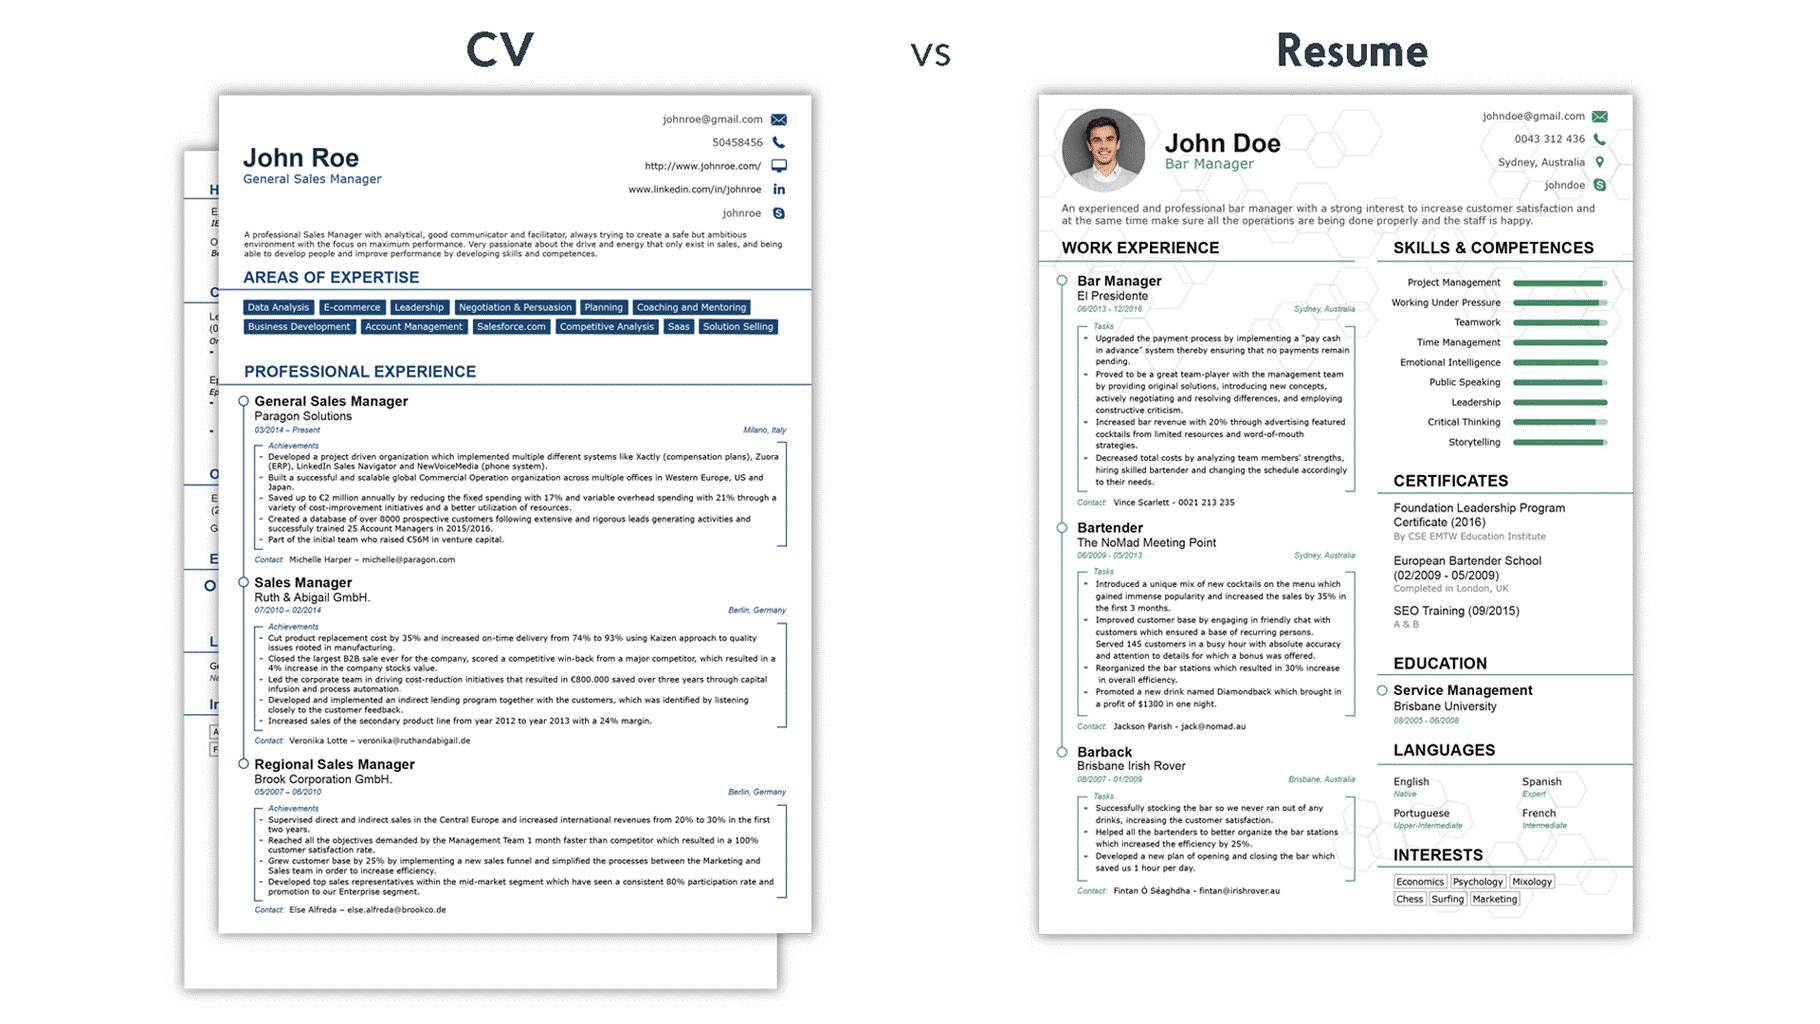 CV vs Resume : Here are the differences between the two